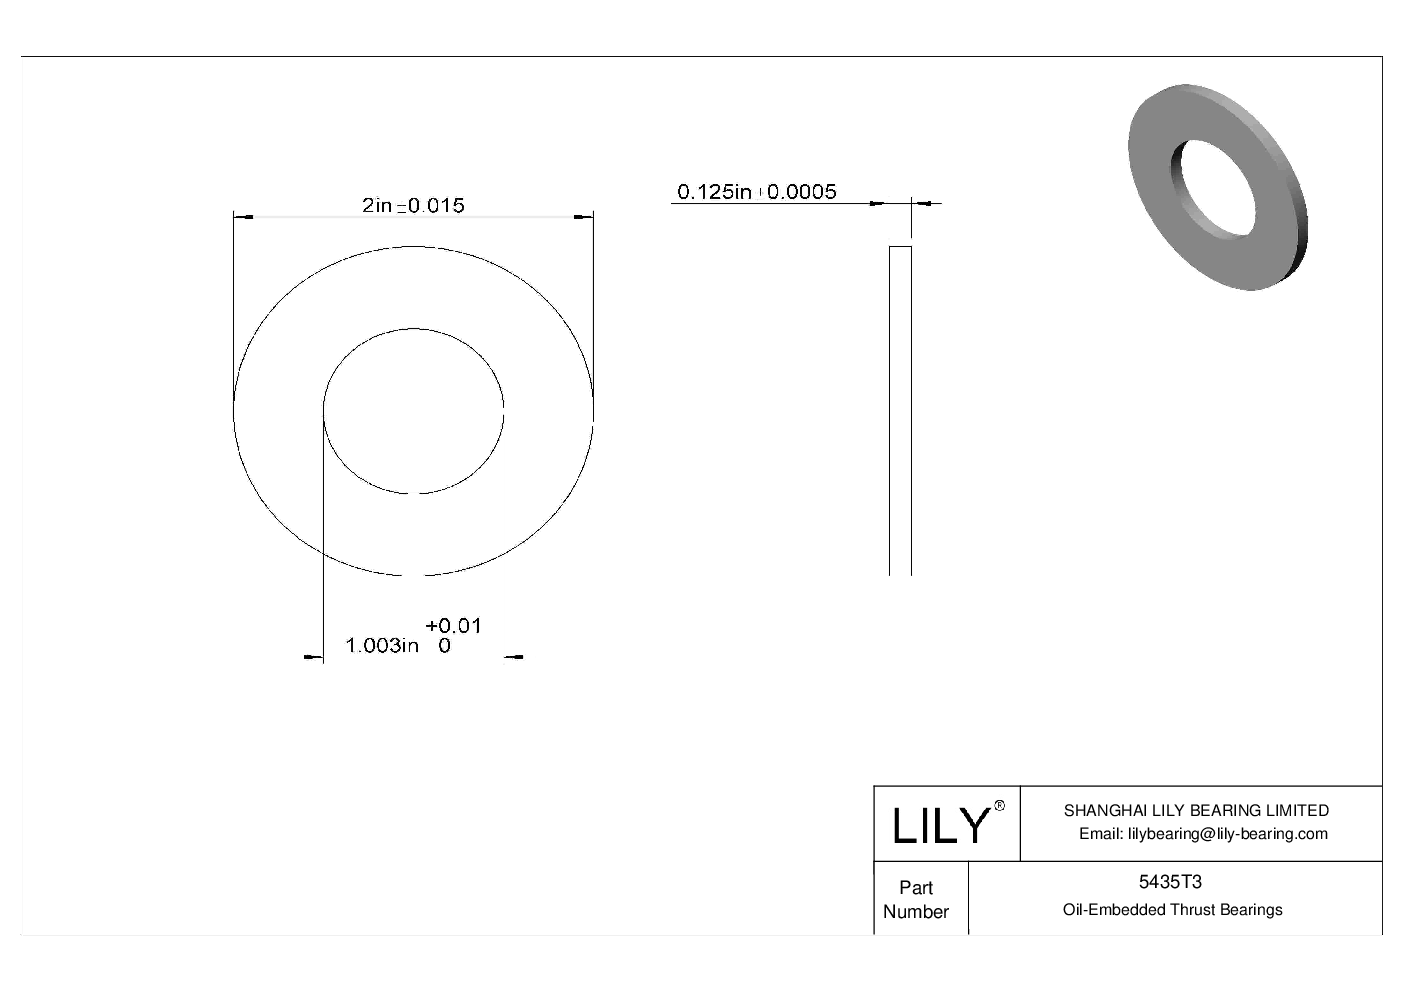 FEDFTD High-Load Food Industry Oil-Embedded Thrust Bearings cad drawing